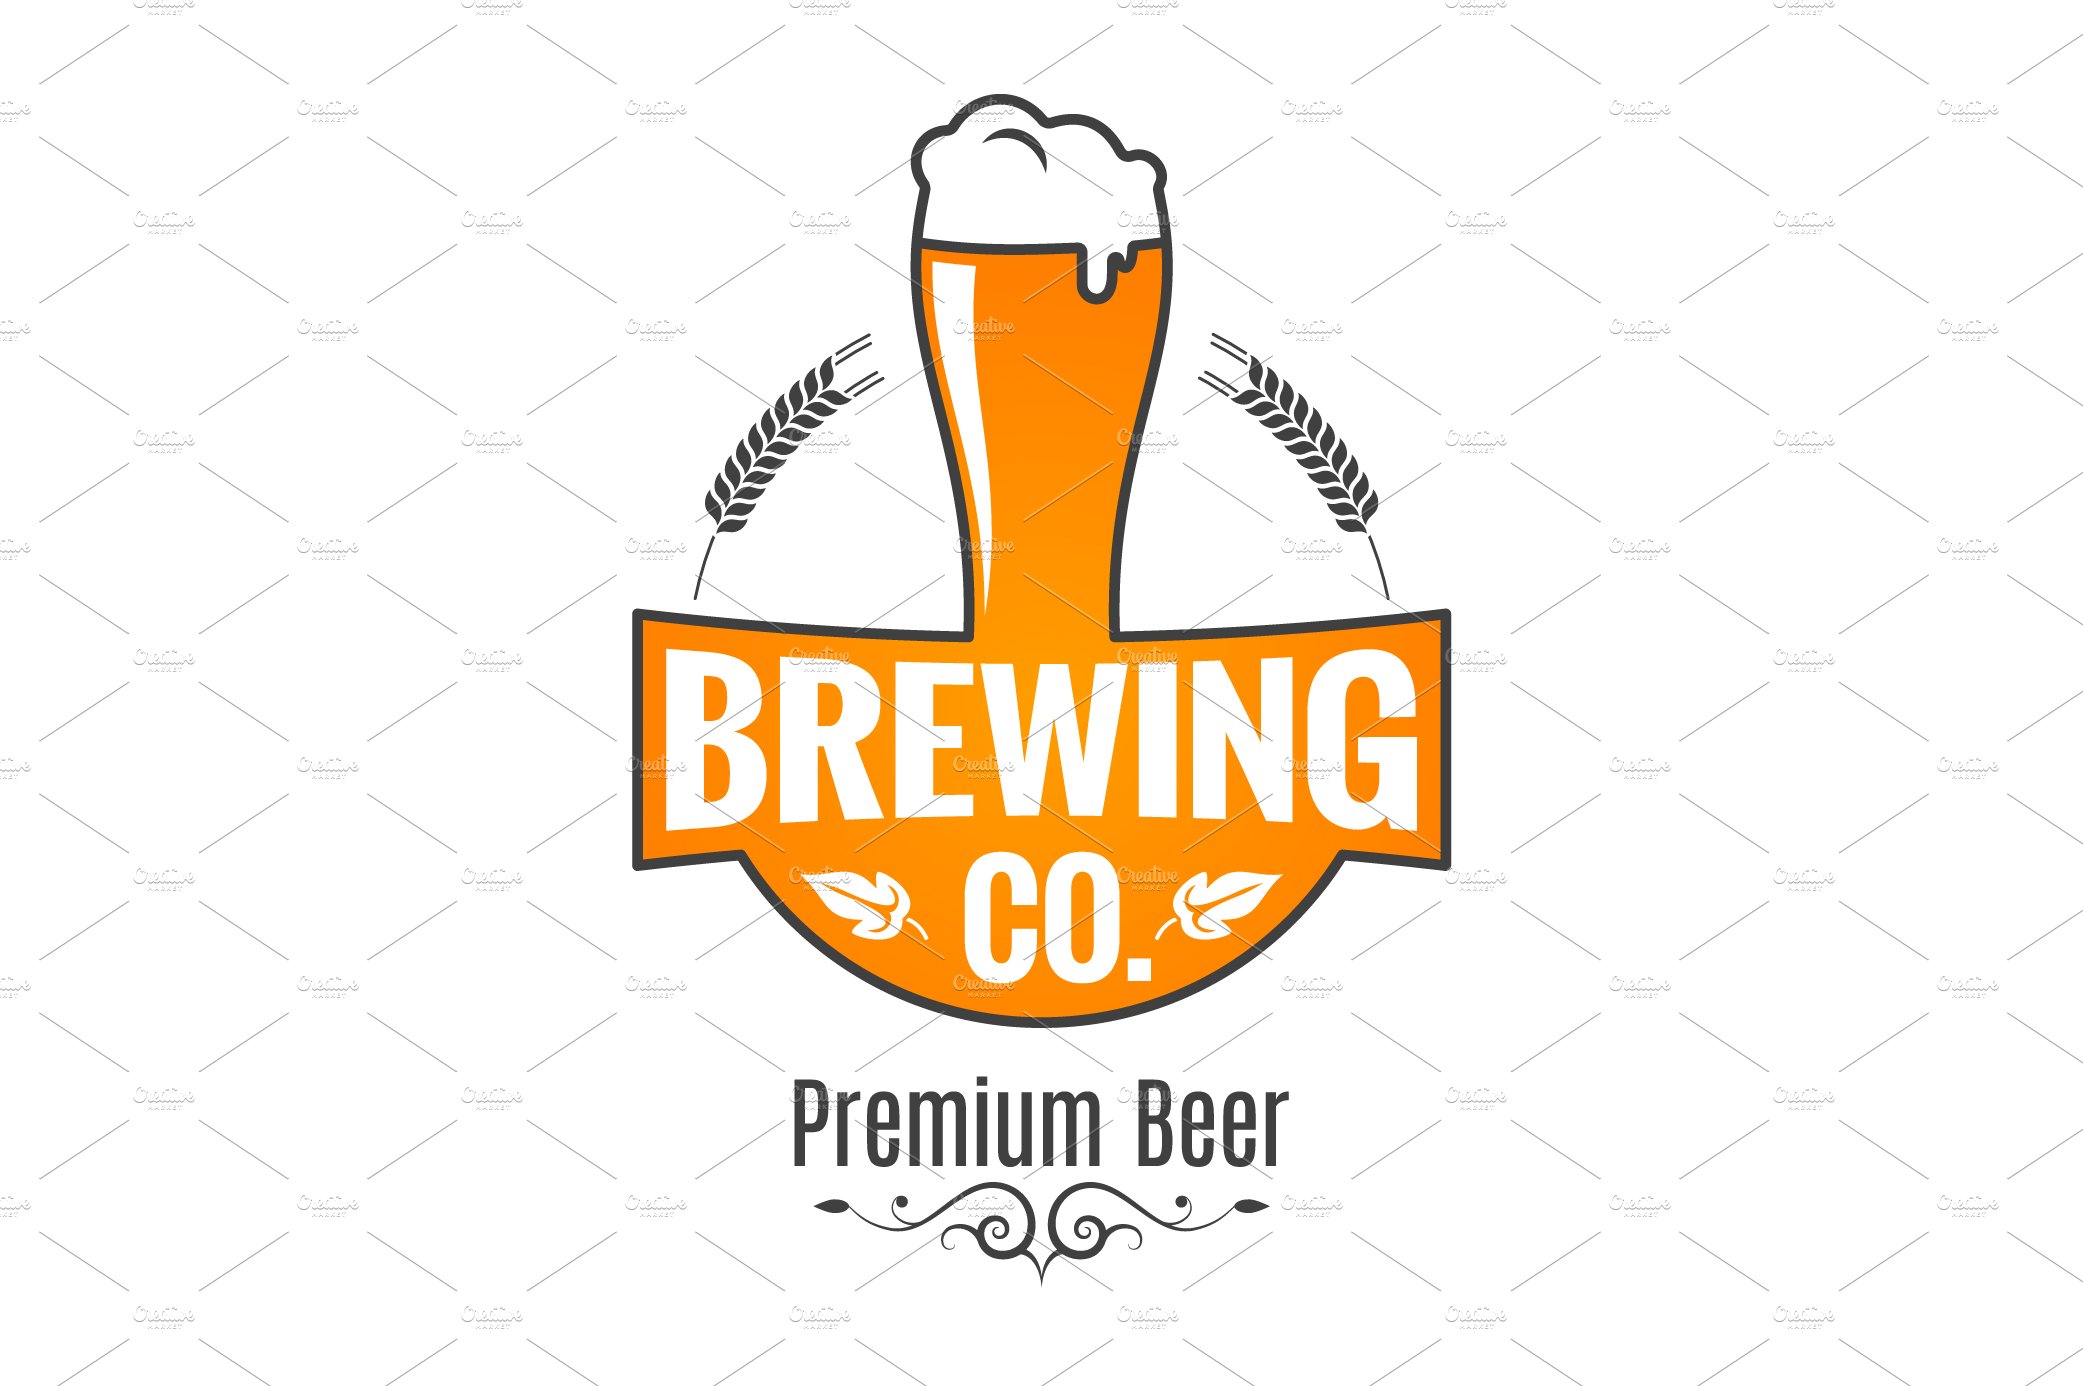 Beer glass logo. Brewing label cover image.